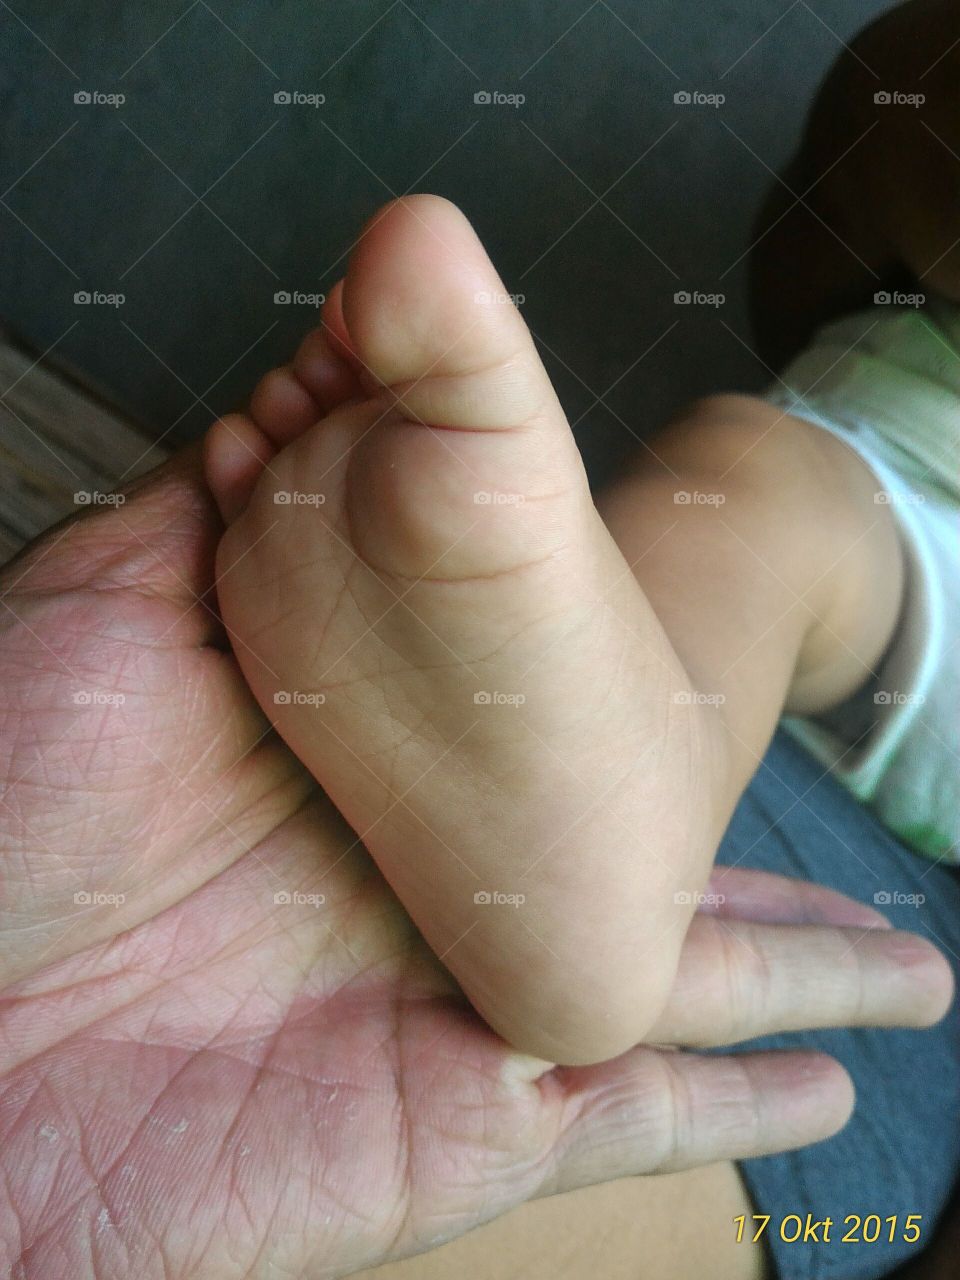 Child, Hand, Baby, Foot, People